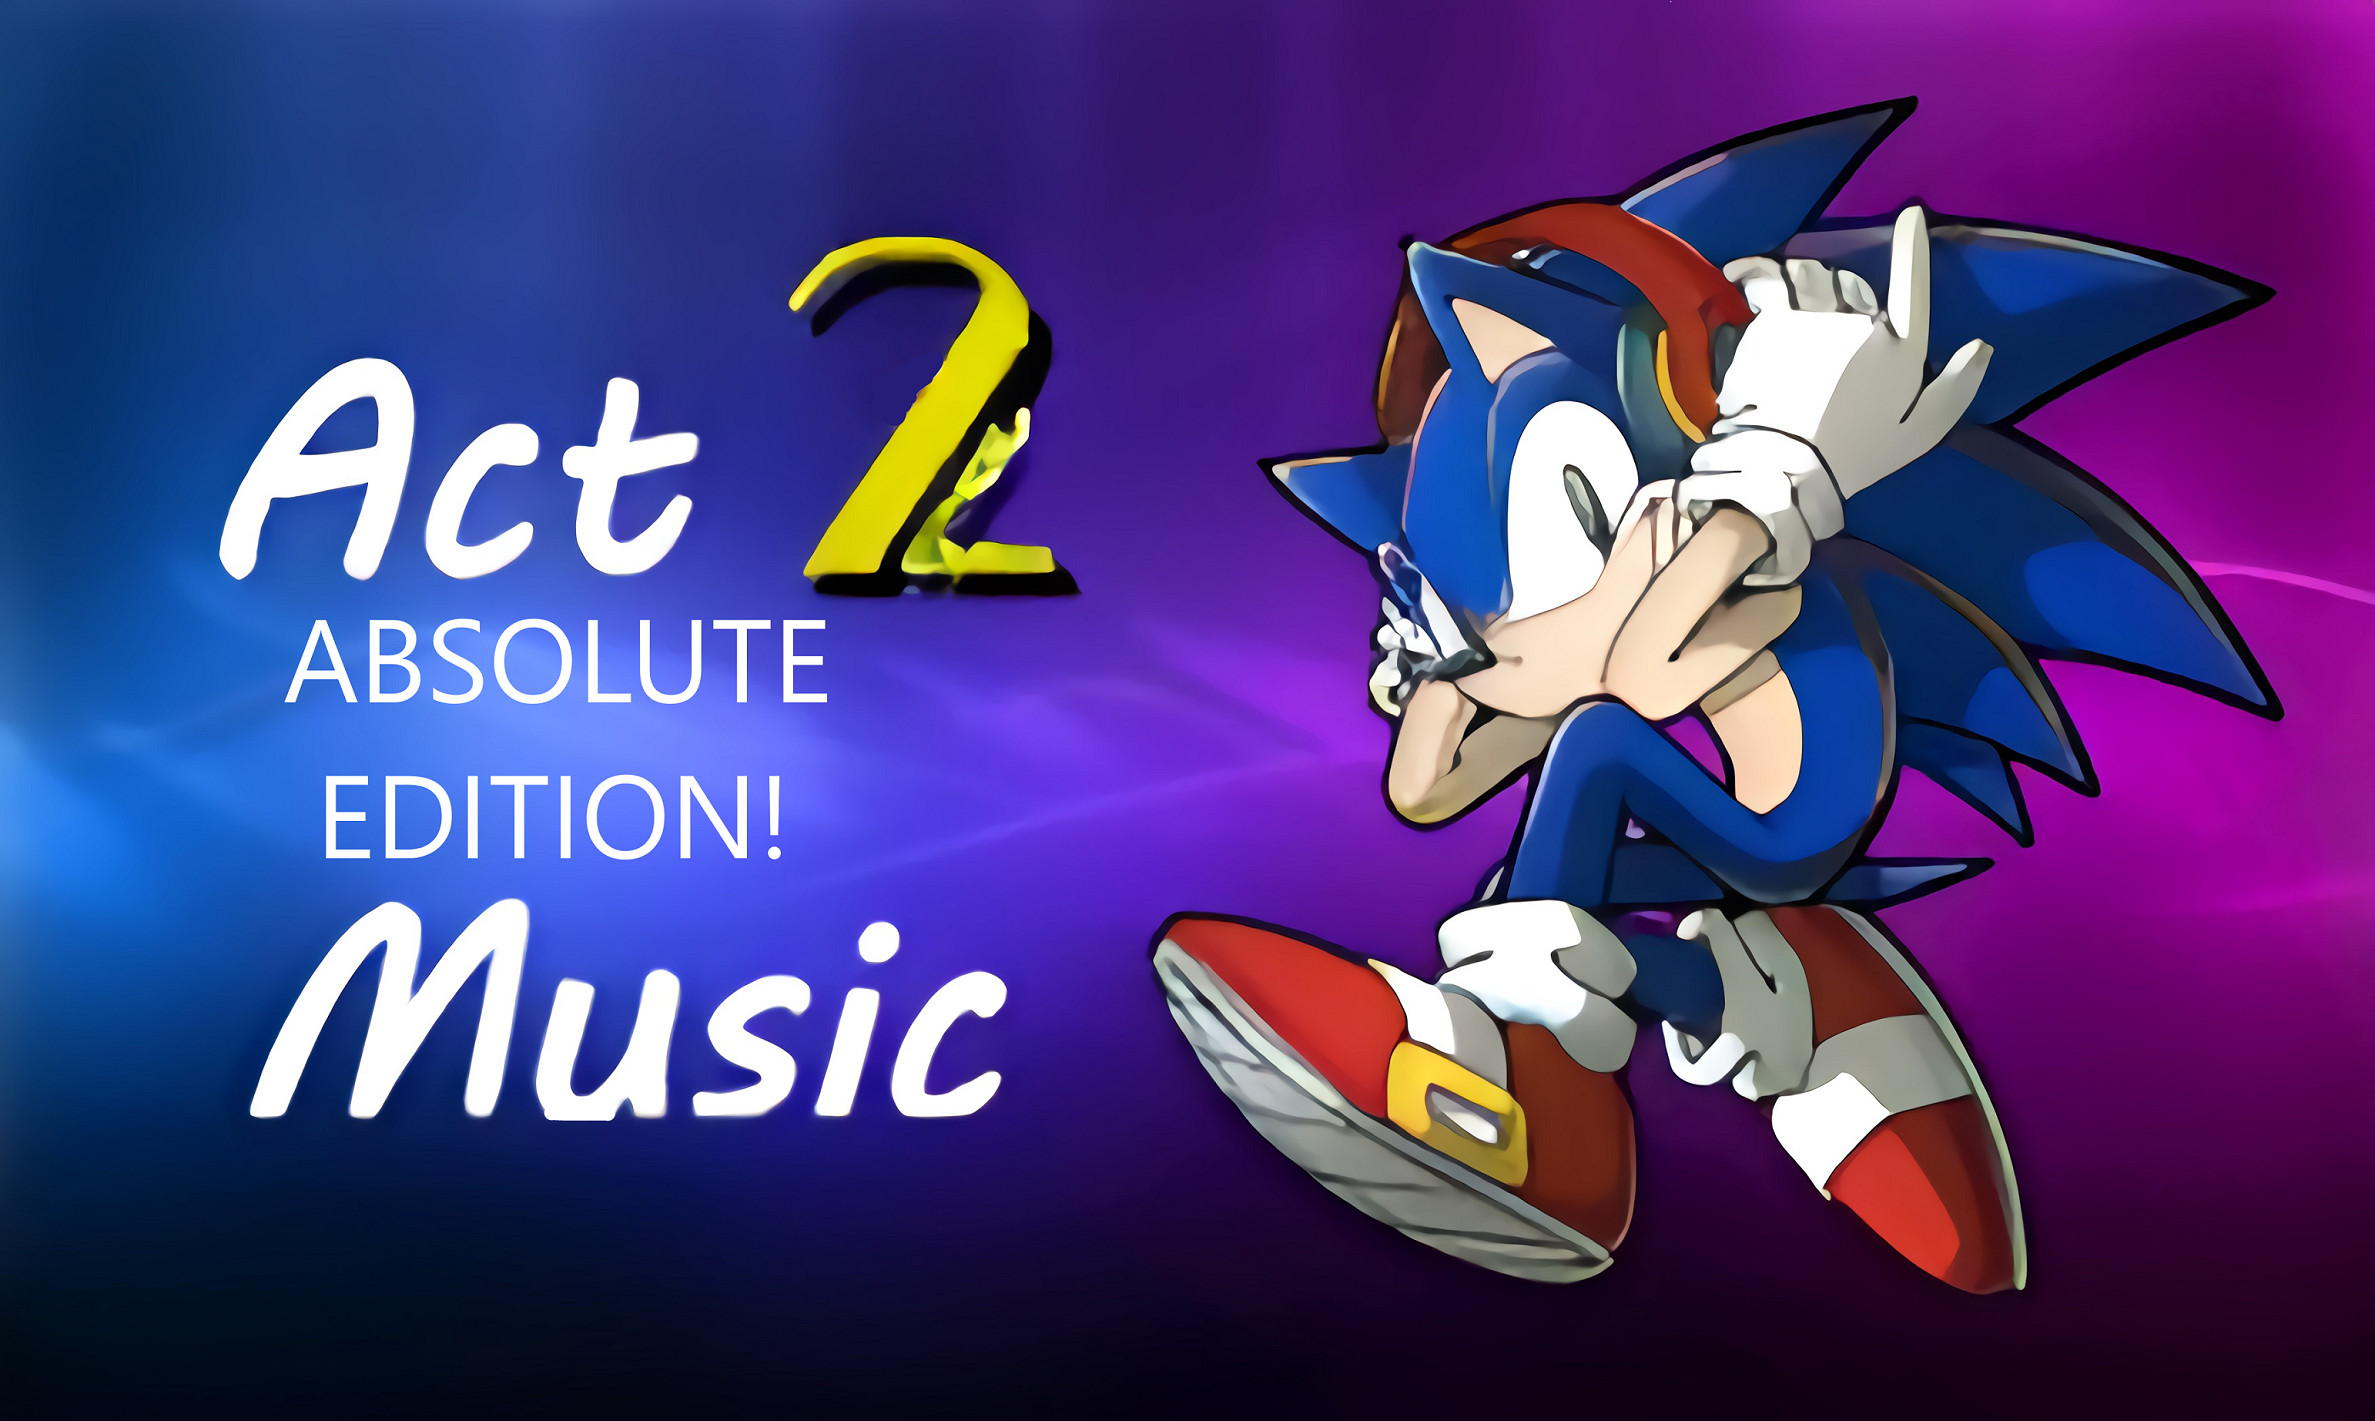 Sonic absolute mods. Sonic Music. Sonic 2 absolute org. Нойз Соник. Exstra Gamble Scramble Sonic 2 Absolut.